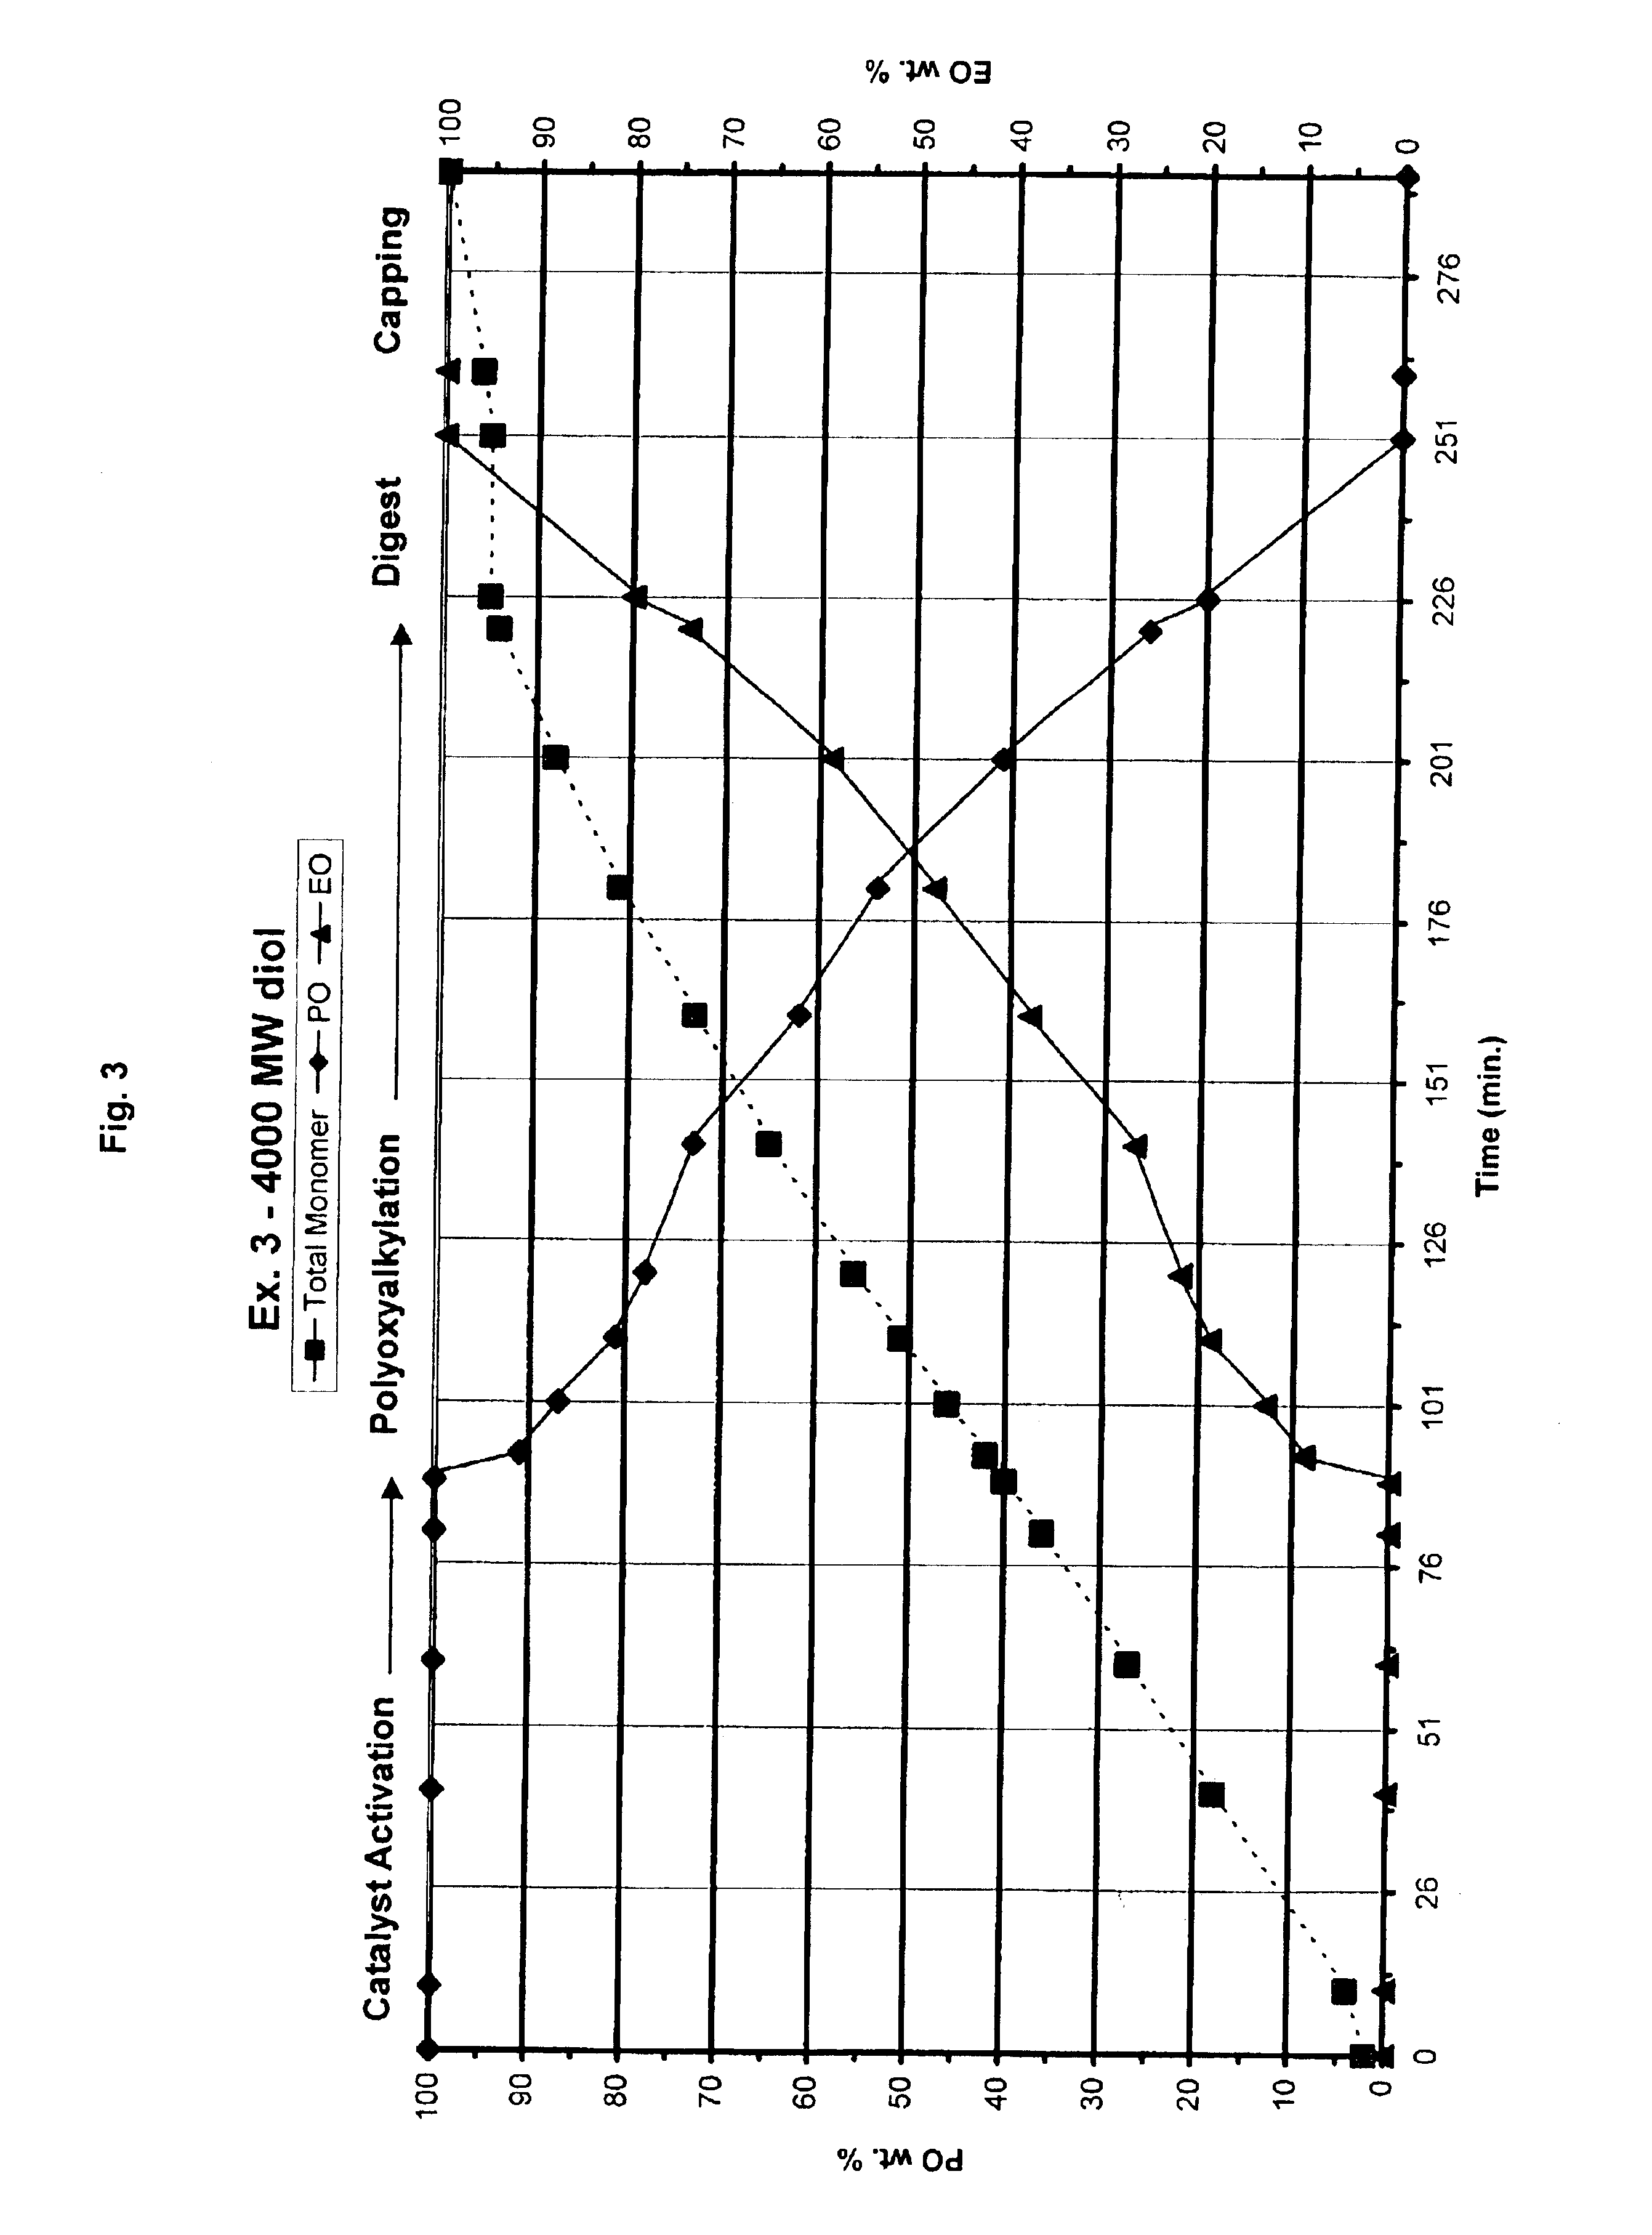 Process for preparing double metal cyanide catalyzed polyols